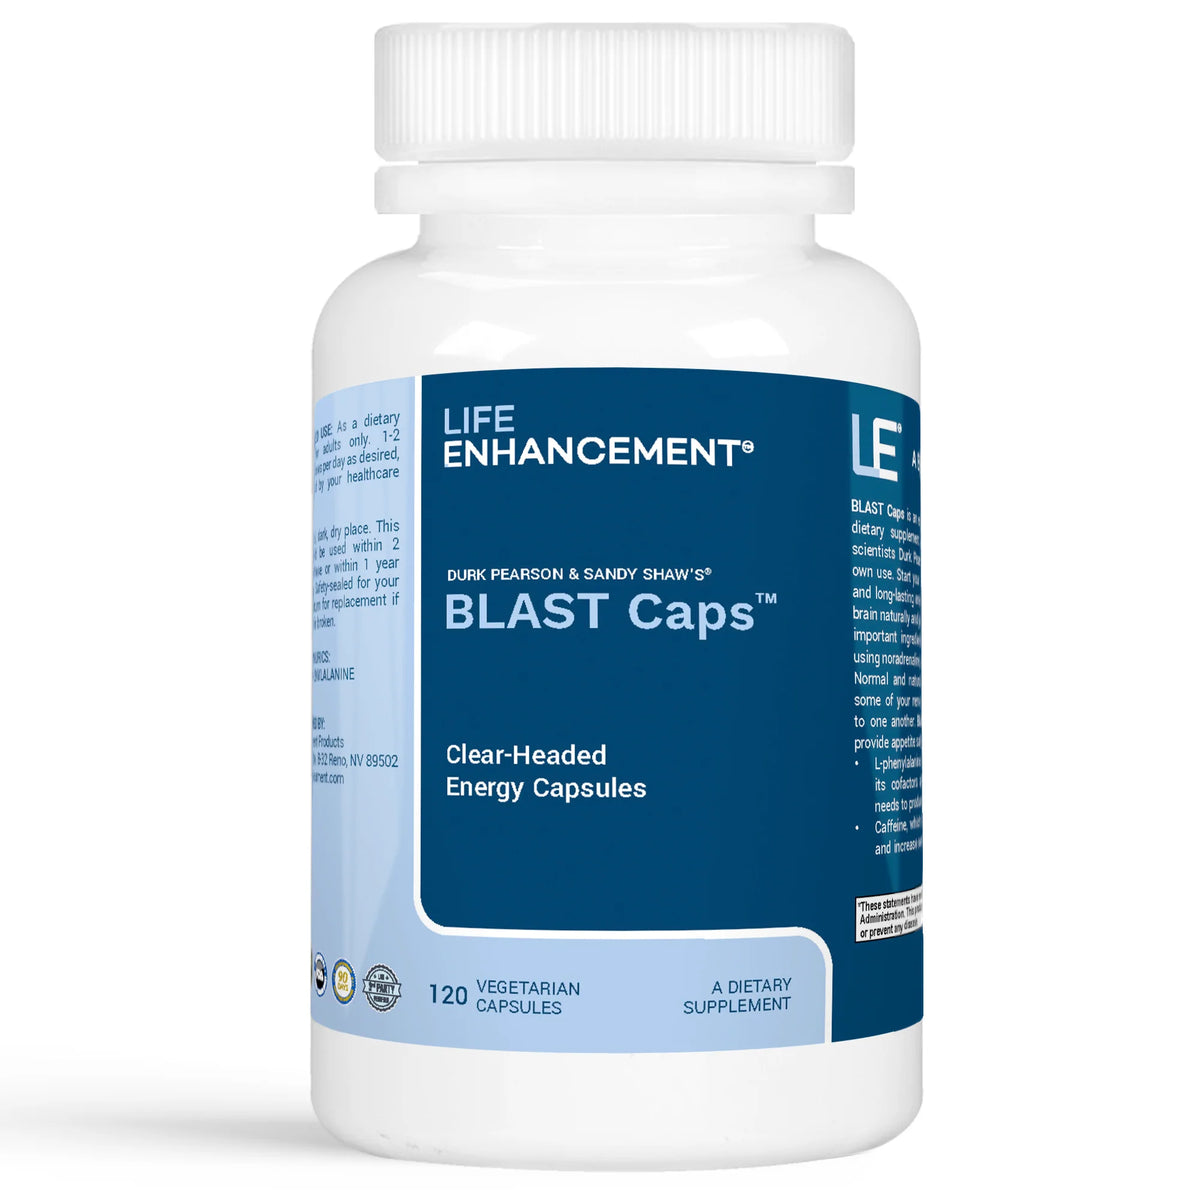 Blast Caps (120 capsules) Brain-Food for Fast, Smooth, Clear-Headed Energy